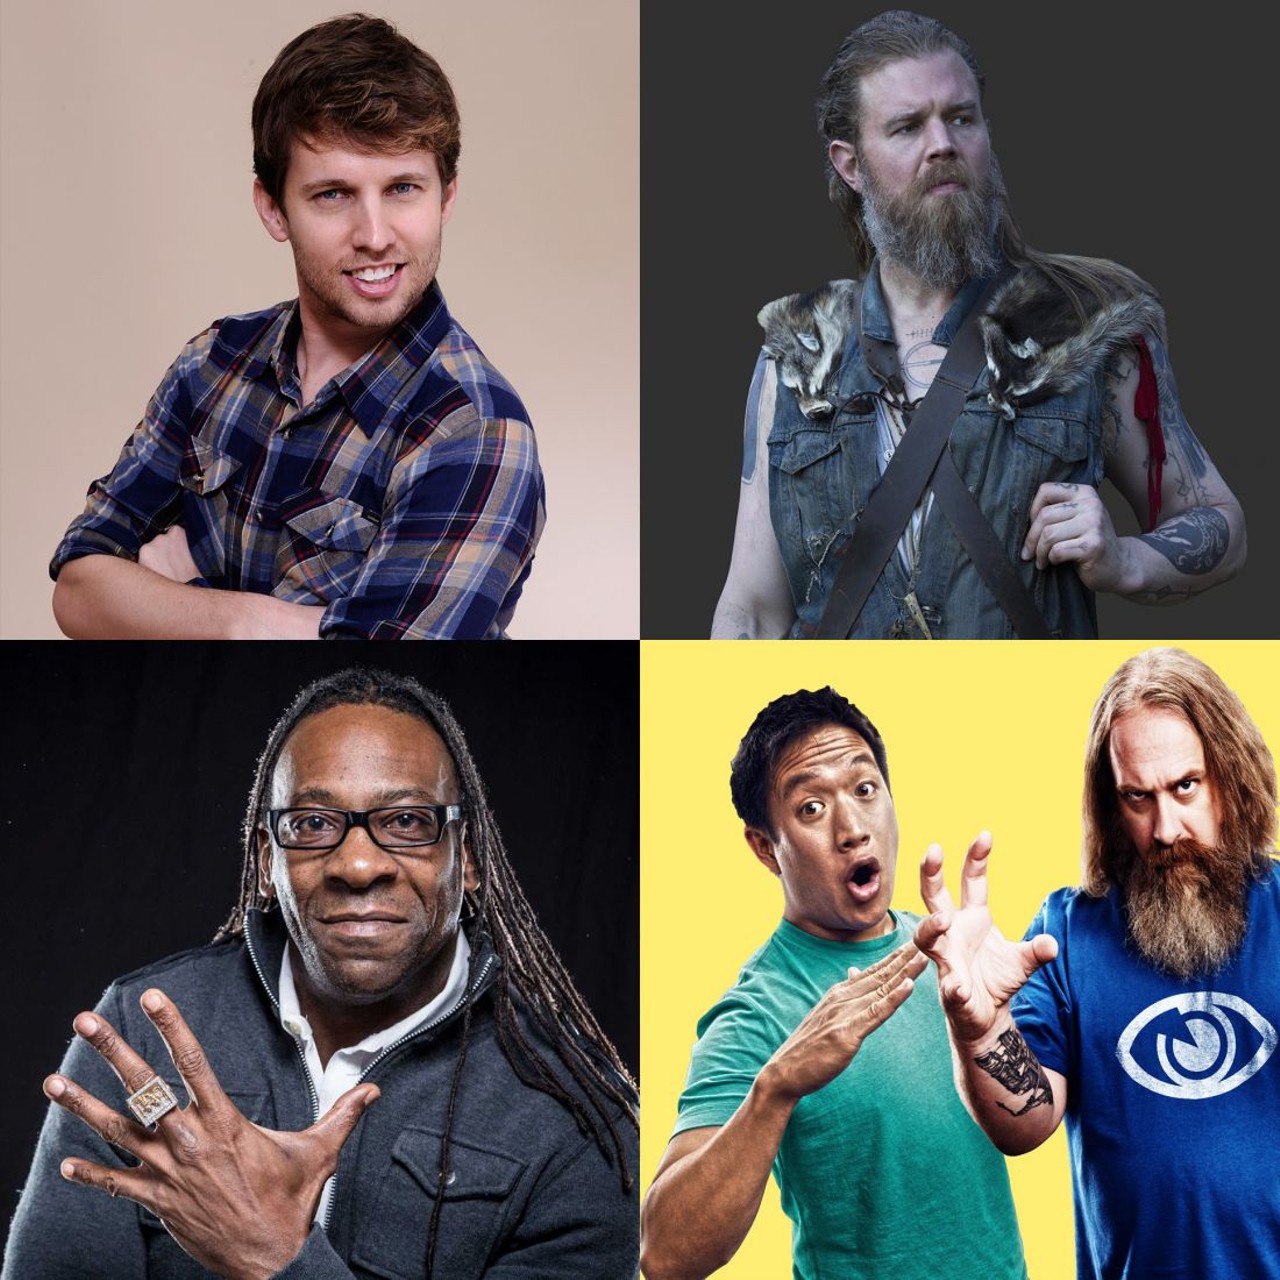 FRI 2/9 - SUN, 2/11
Astronomicon 
@ Wyndham Garden Sterling Heights  
Metro Detroit&#146;s newest pop culture convention comes to town with a bang this February. Napoleon Dynamite star Jon Heder and Sons of Anarchy's Ryan Hurst are head lining the event. AMC&#146;s Comic Book Men, Bryan Johnson and Ming Chen; semi-retired wrestler and actor Kevin Nash; and Detroit&#146;s own Twiztid will all be making appearances at the convention &#151; along with many other wrestling legends and pop culture stars. The convention will include panel discussions, workshops for the kiddos, and professional photo ops with your favorite stars. 
The convention runs Friday, 5 p.m. - 10 p.m. Saturday, 11 a.m - 7 p.m. Sunday, 11 a.m - 5 p.m; Wyndham Garden Hotel, 34911 Van Dyke, Sterling Heights; astronomicon.com; Single Ticket for $25-$35, Weekend $60; VIP, Concert, and Photo Op packages are also available.  
Photo via 4 Square 